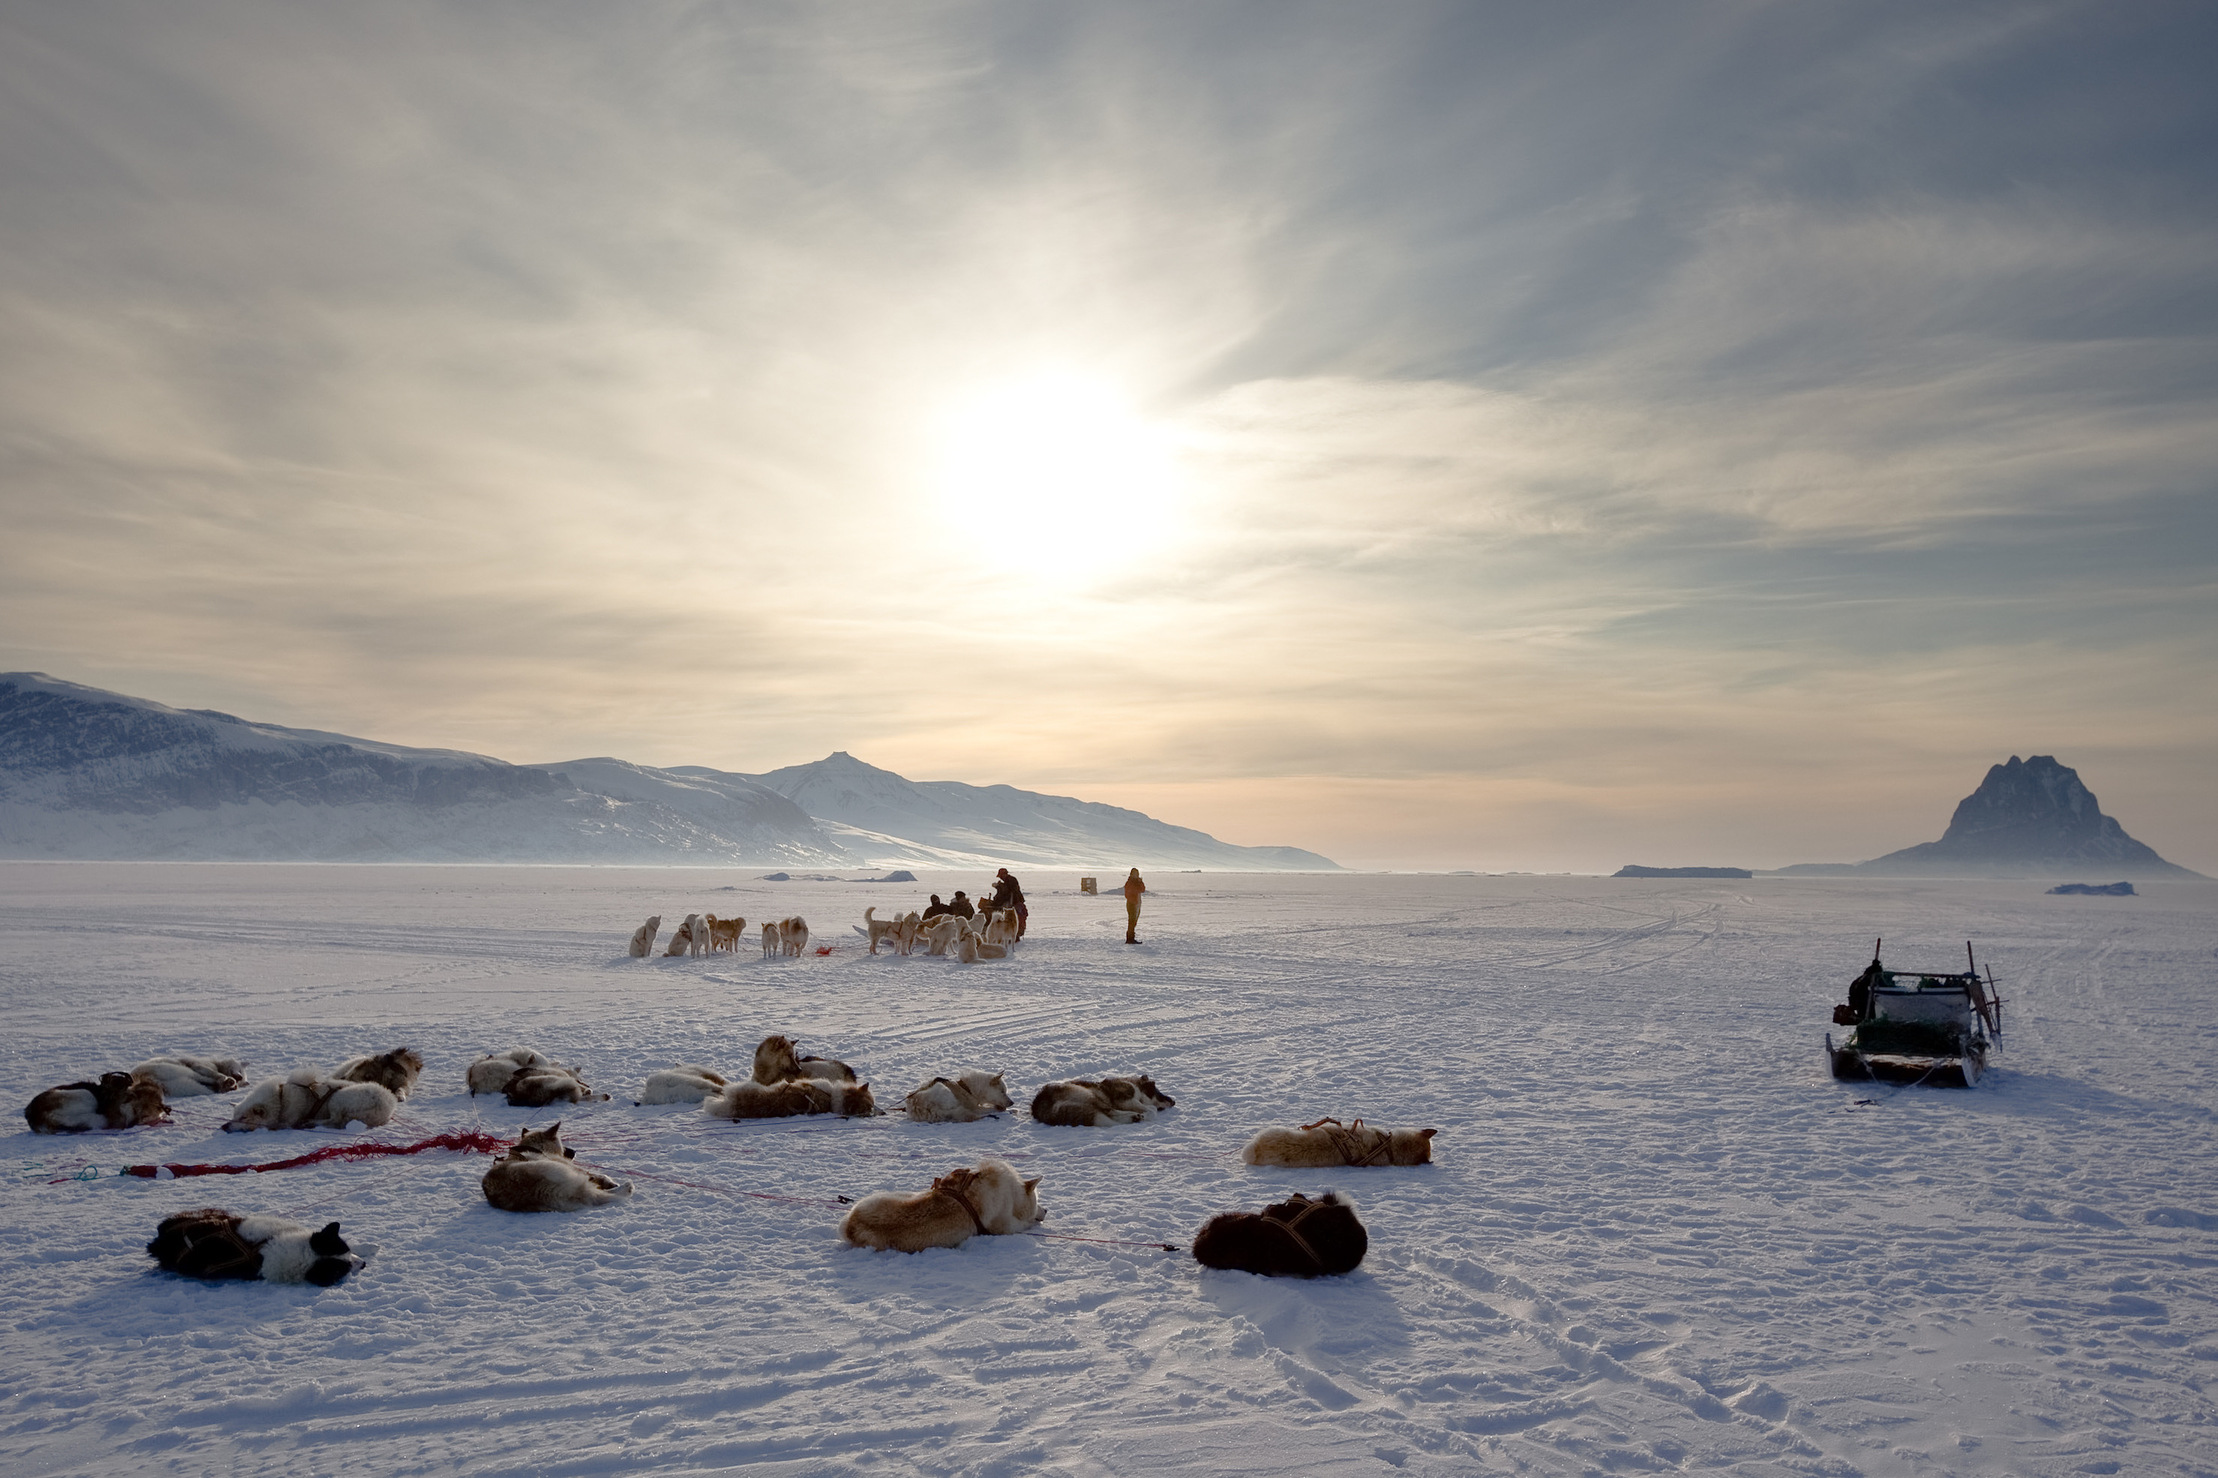 dog sled team at rest on sea ice 2371 2957x1971px